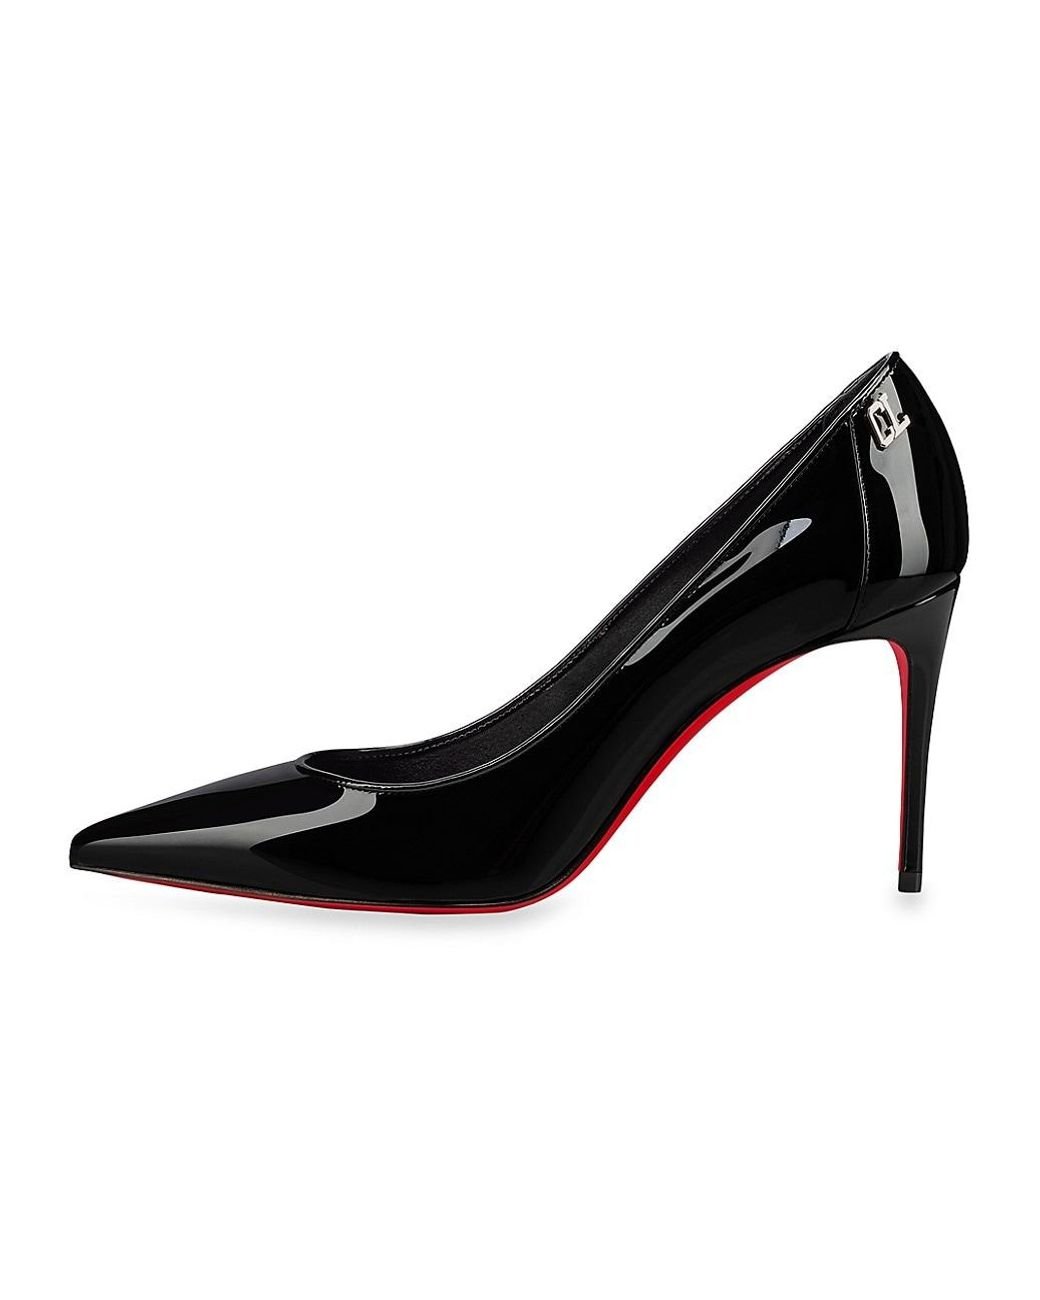 Christian Louboutin Sporty Kate 85 Patent Leather Pumps in Black | Lyst